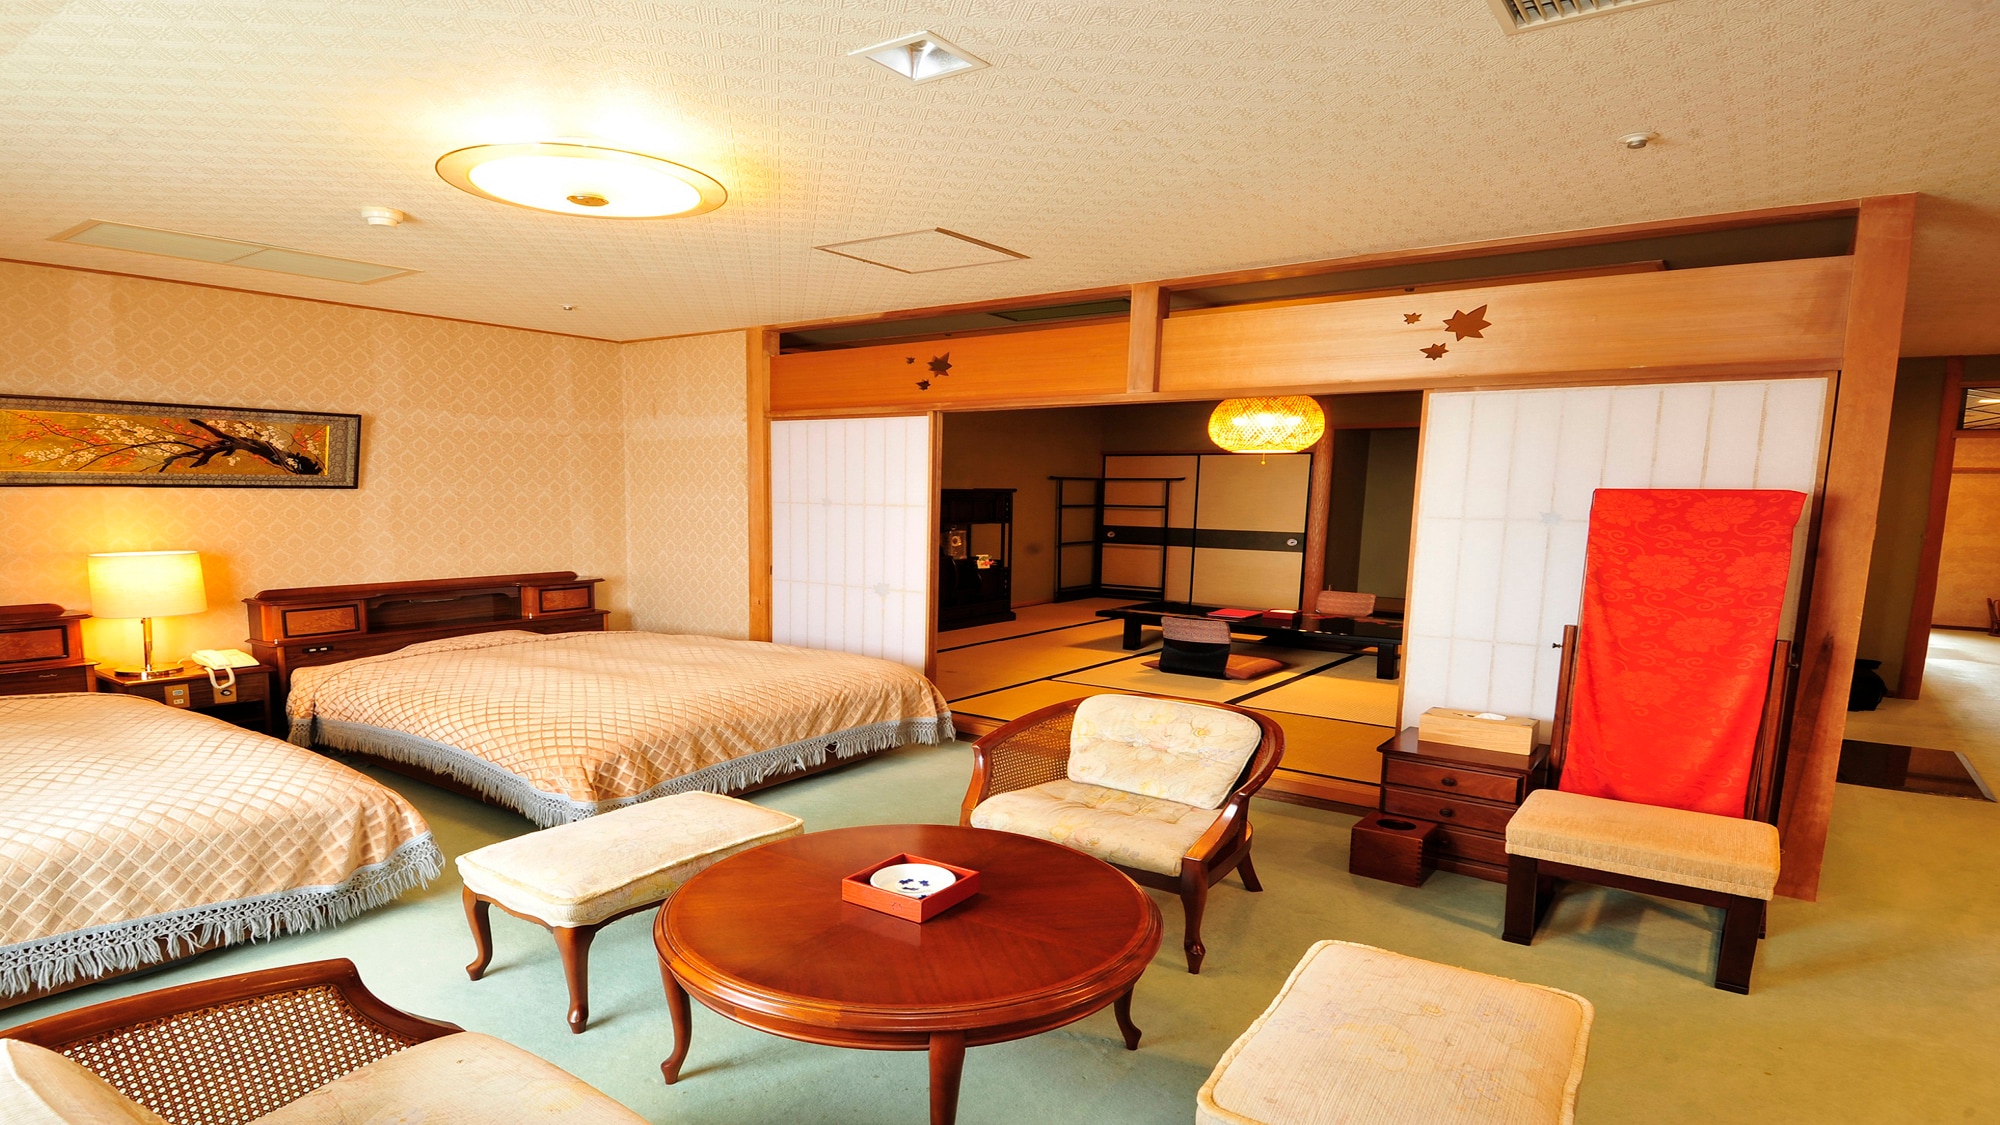 ◆ Japanese and Western rooms (12.5 tatami mats + twin beds)